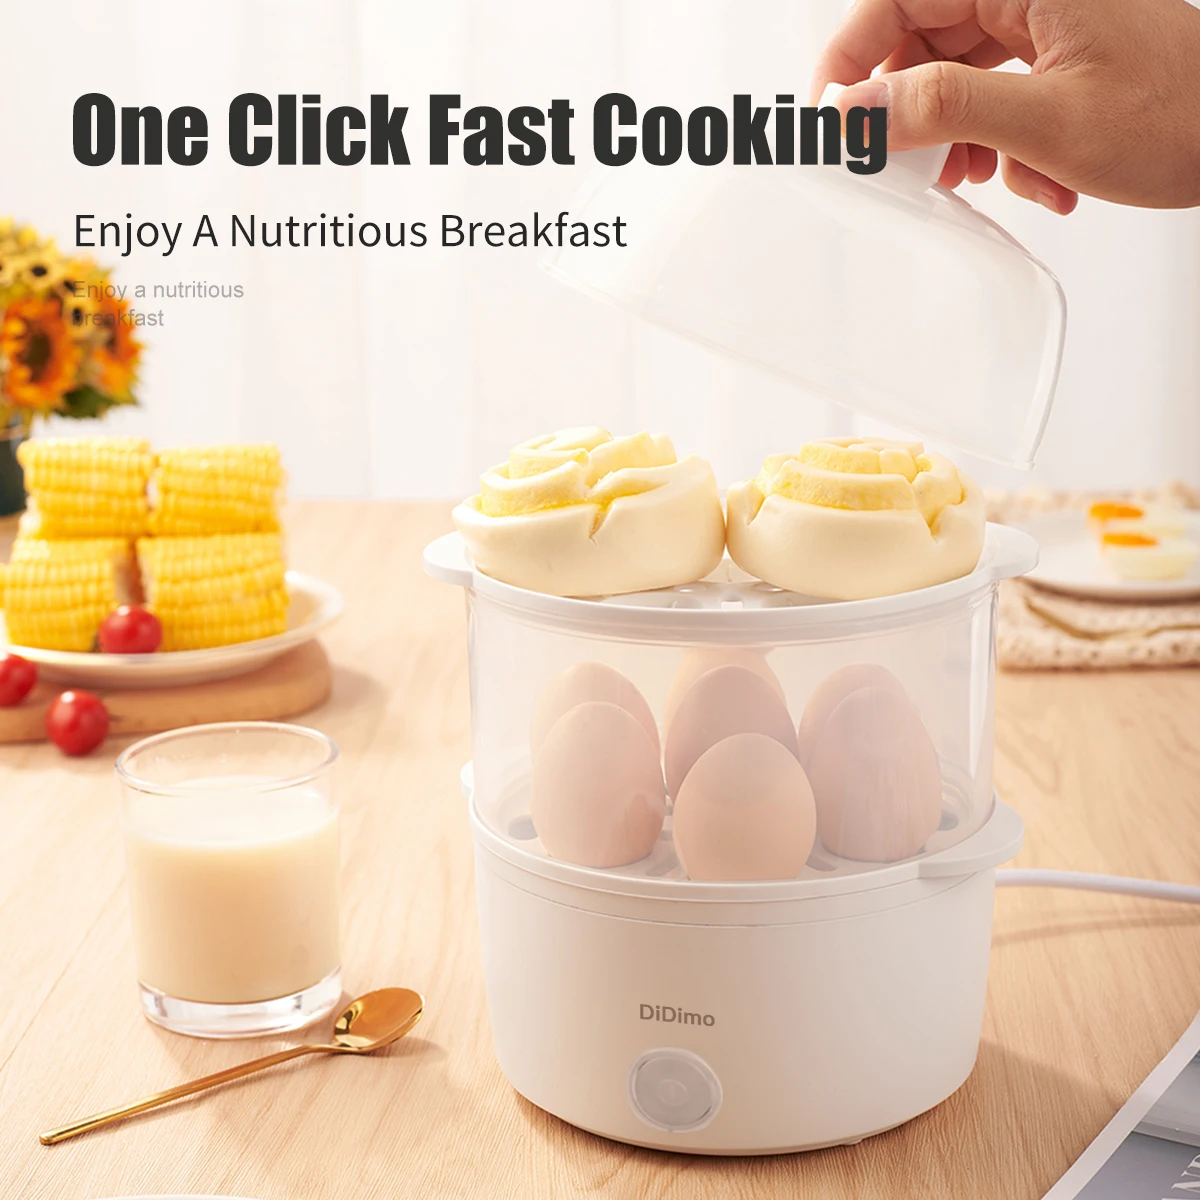 

Multifunctional household mini Fried Eggs artifact dormitory egg boiled egg inserted electric frying breakfast machine automatic